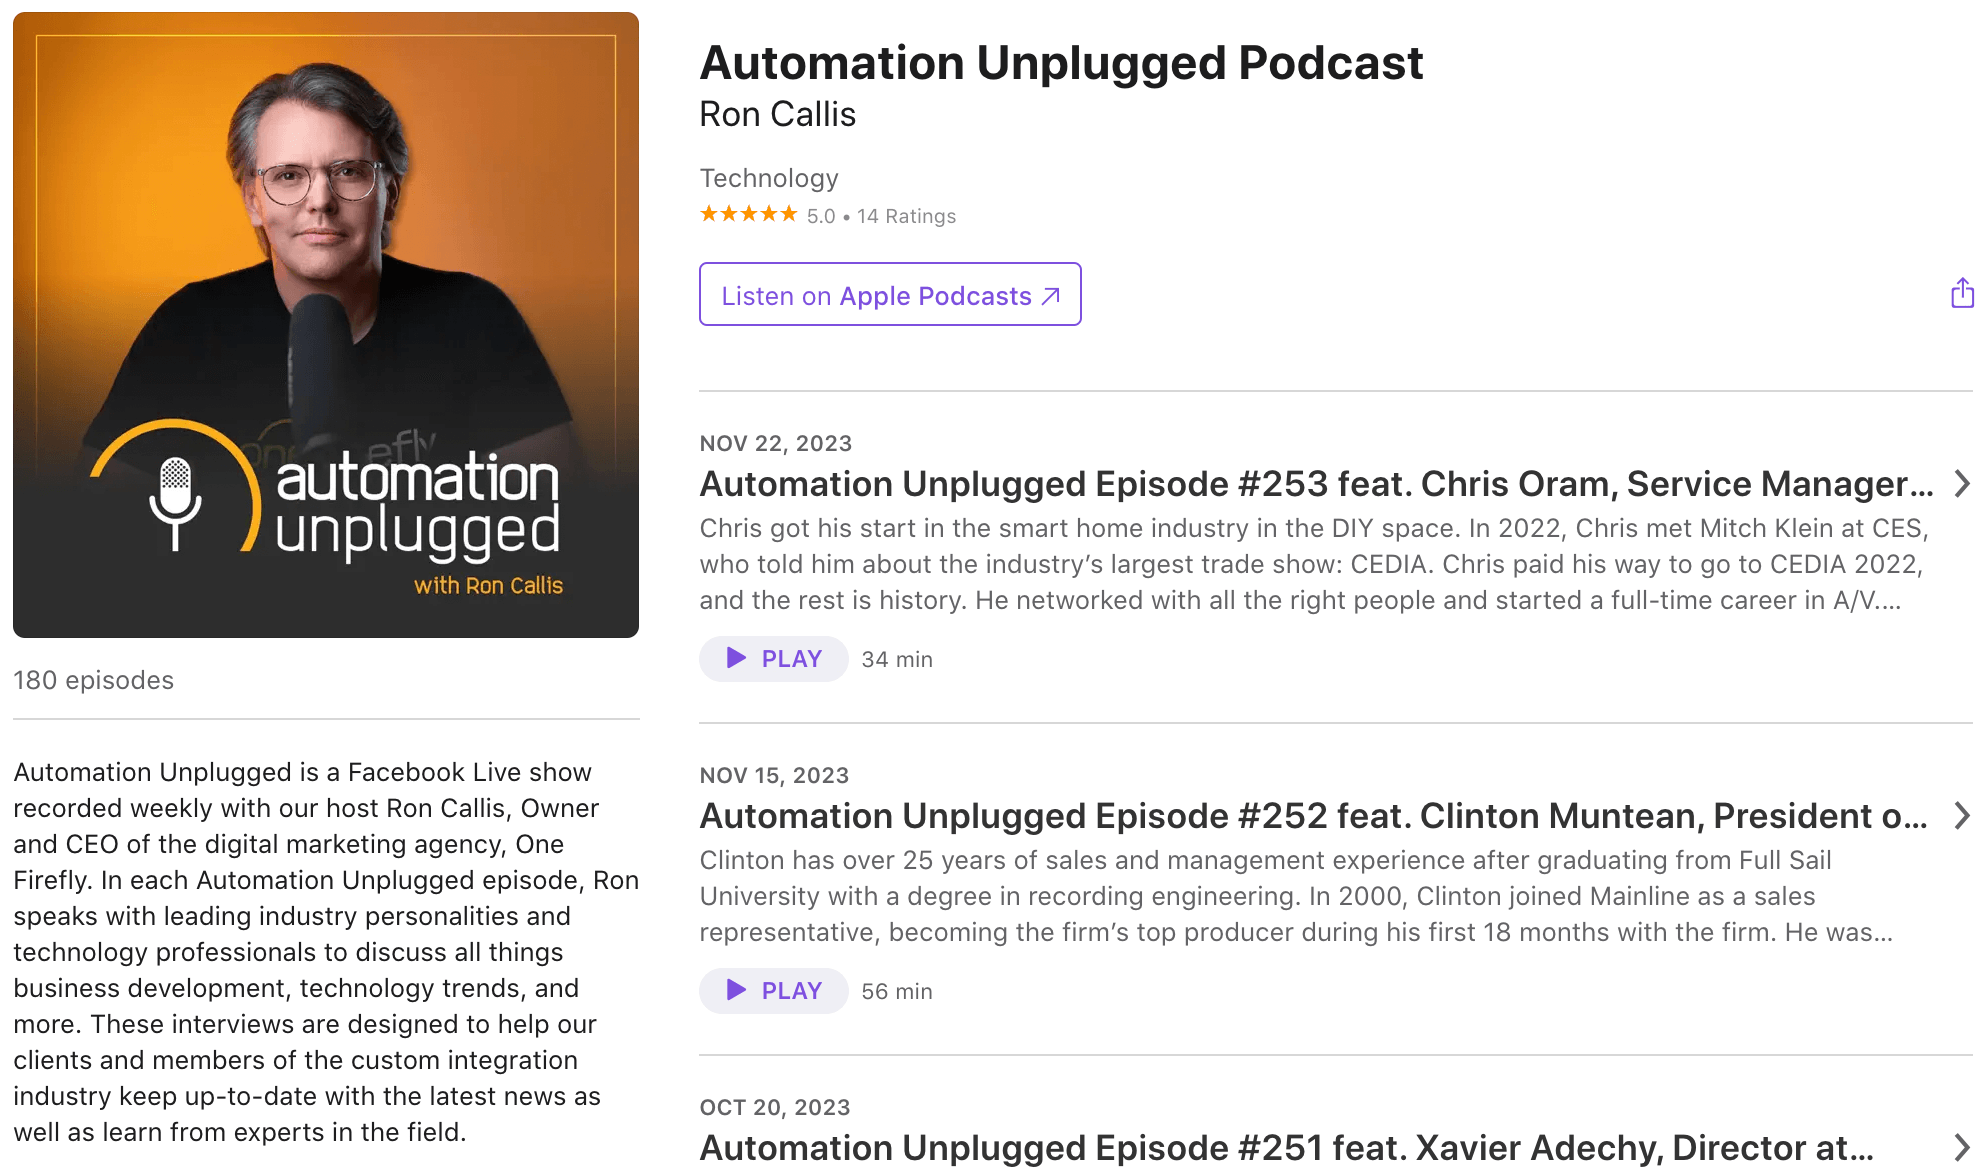 embrace-an-ai-mindset-automation-unplugged-podcast-example